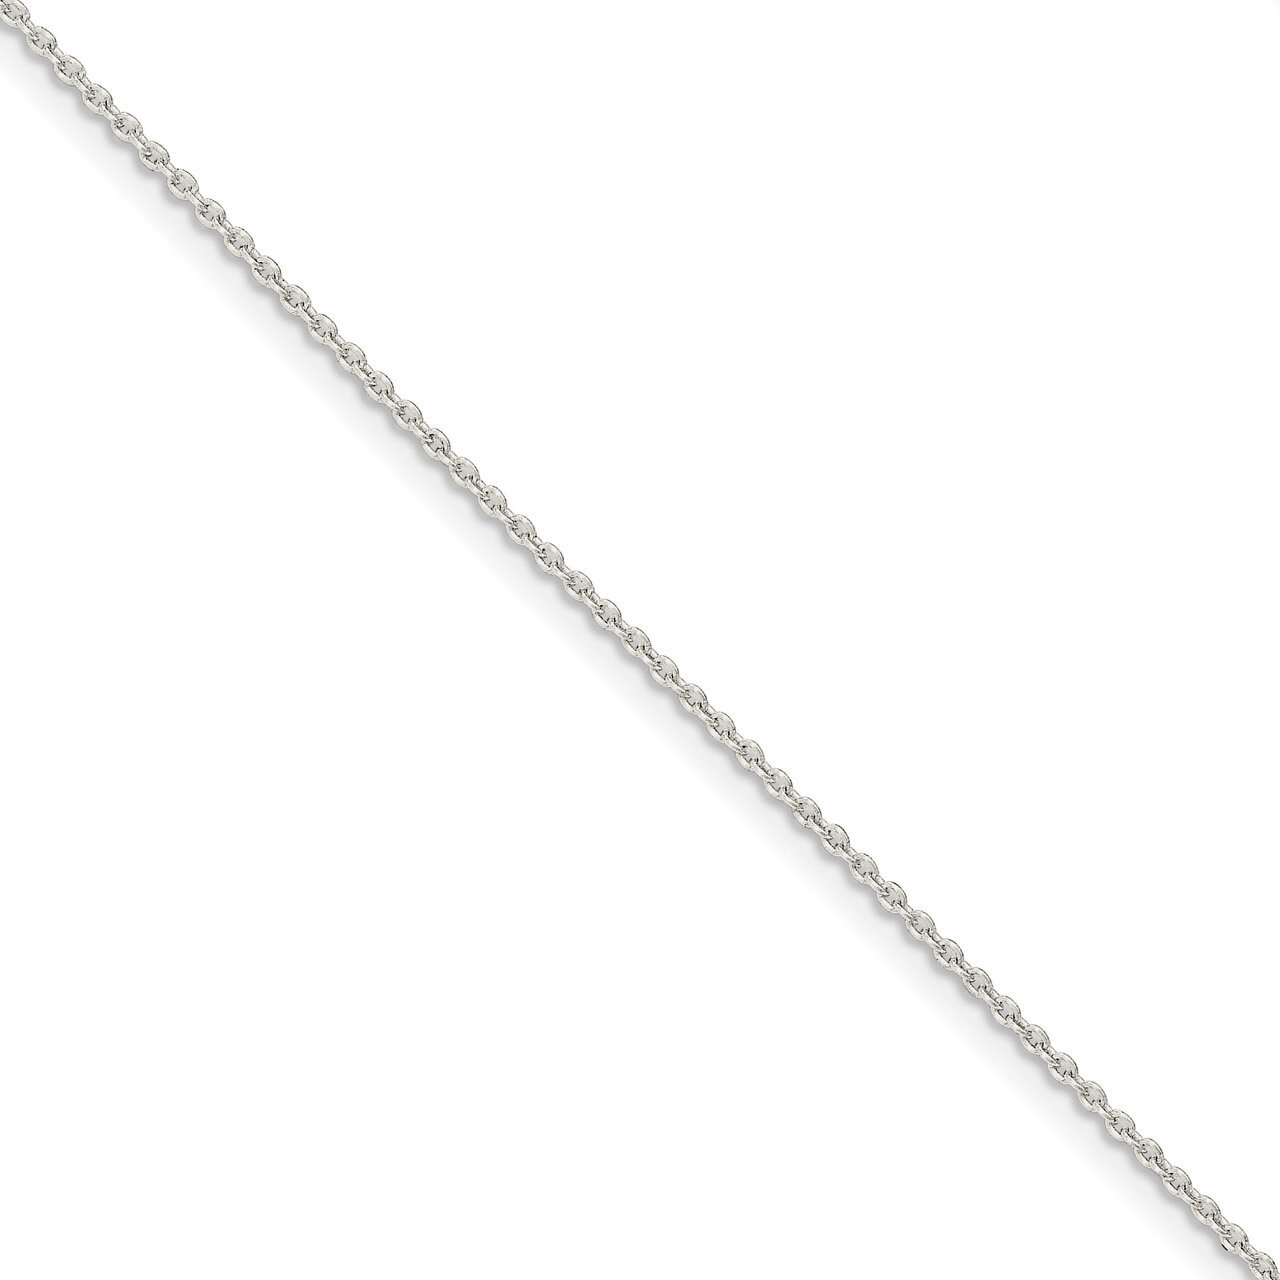 7 Inch 1.5mm Cable Chain Sterling Silver QCL040-7